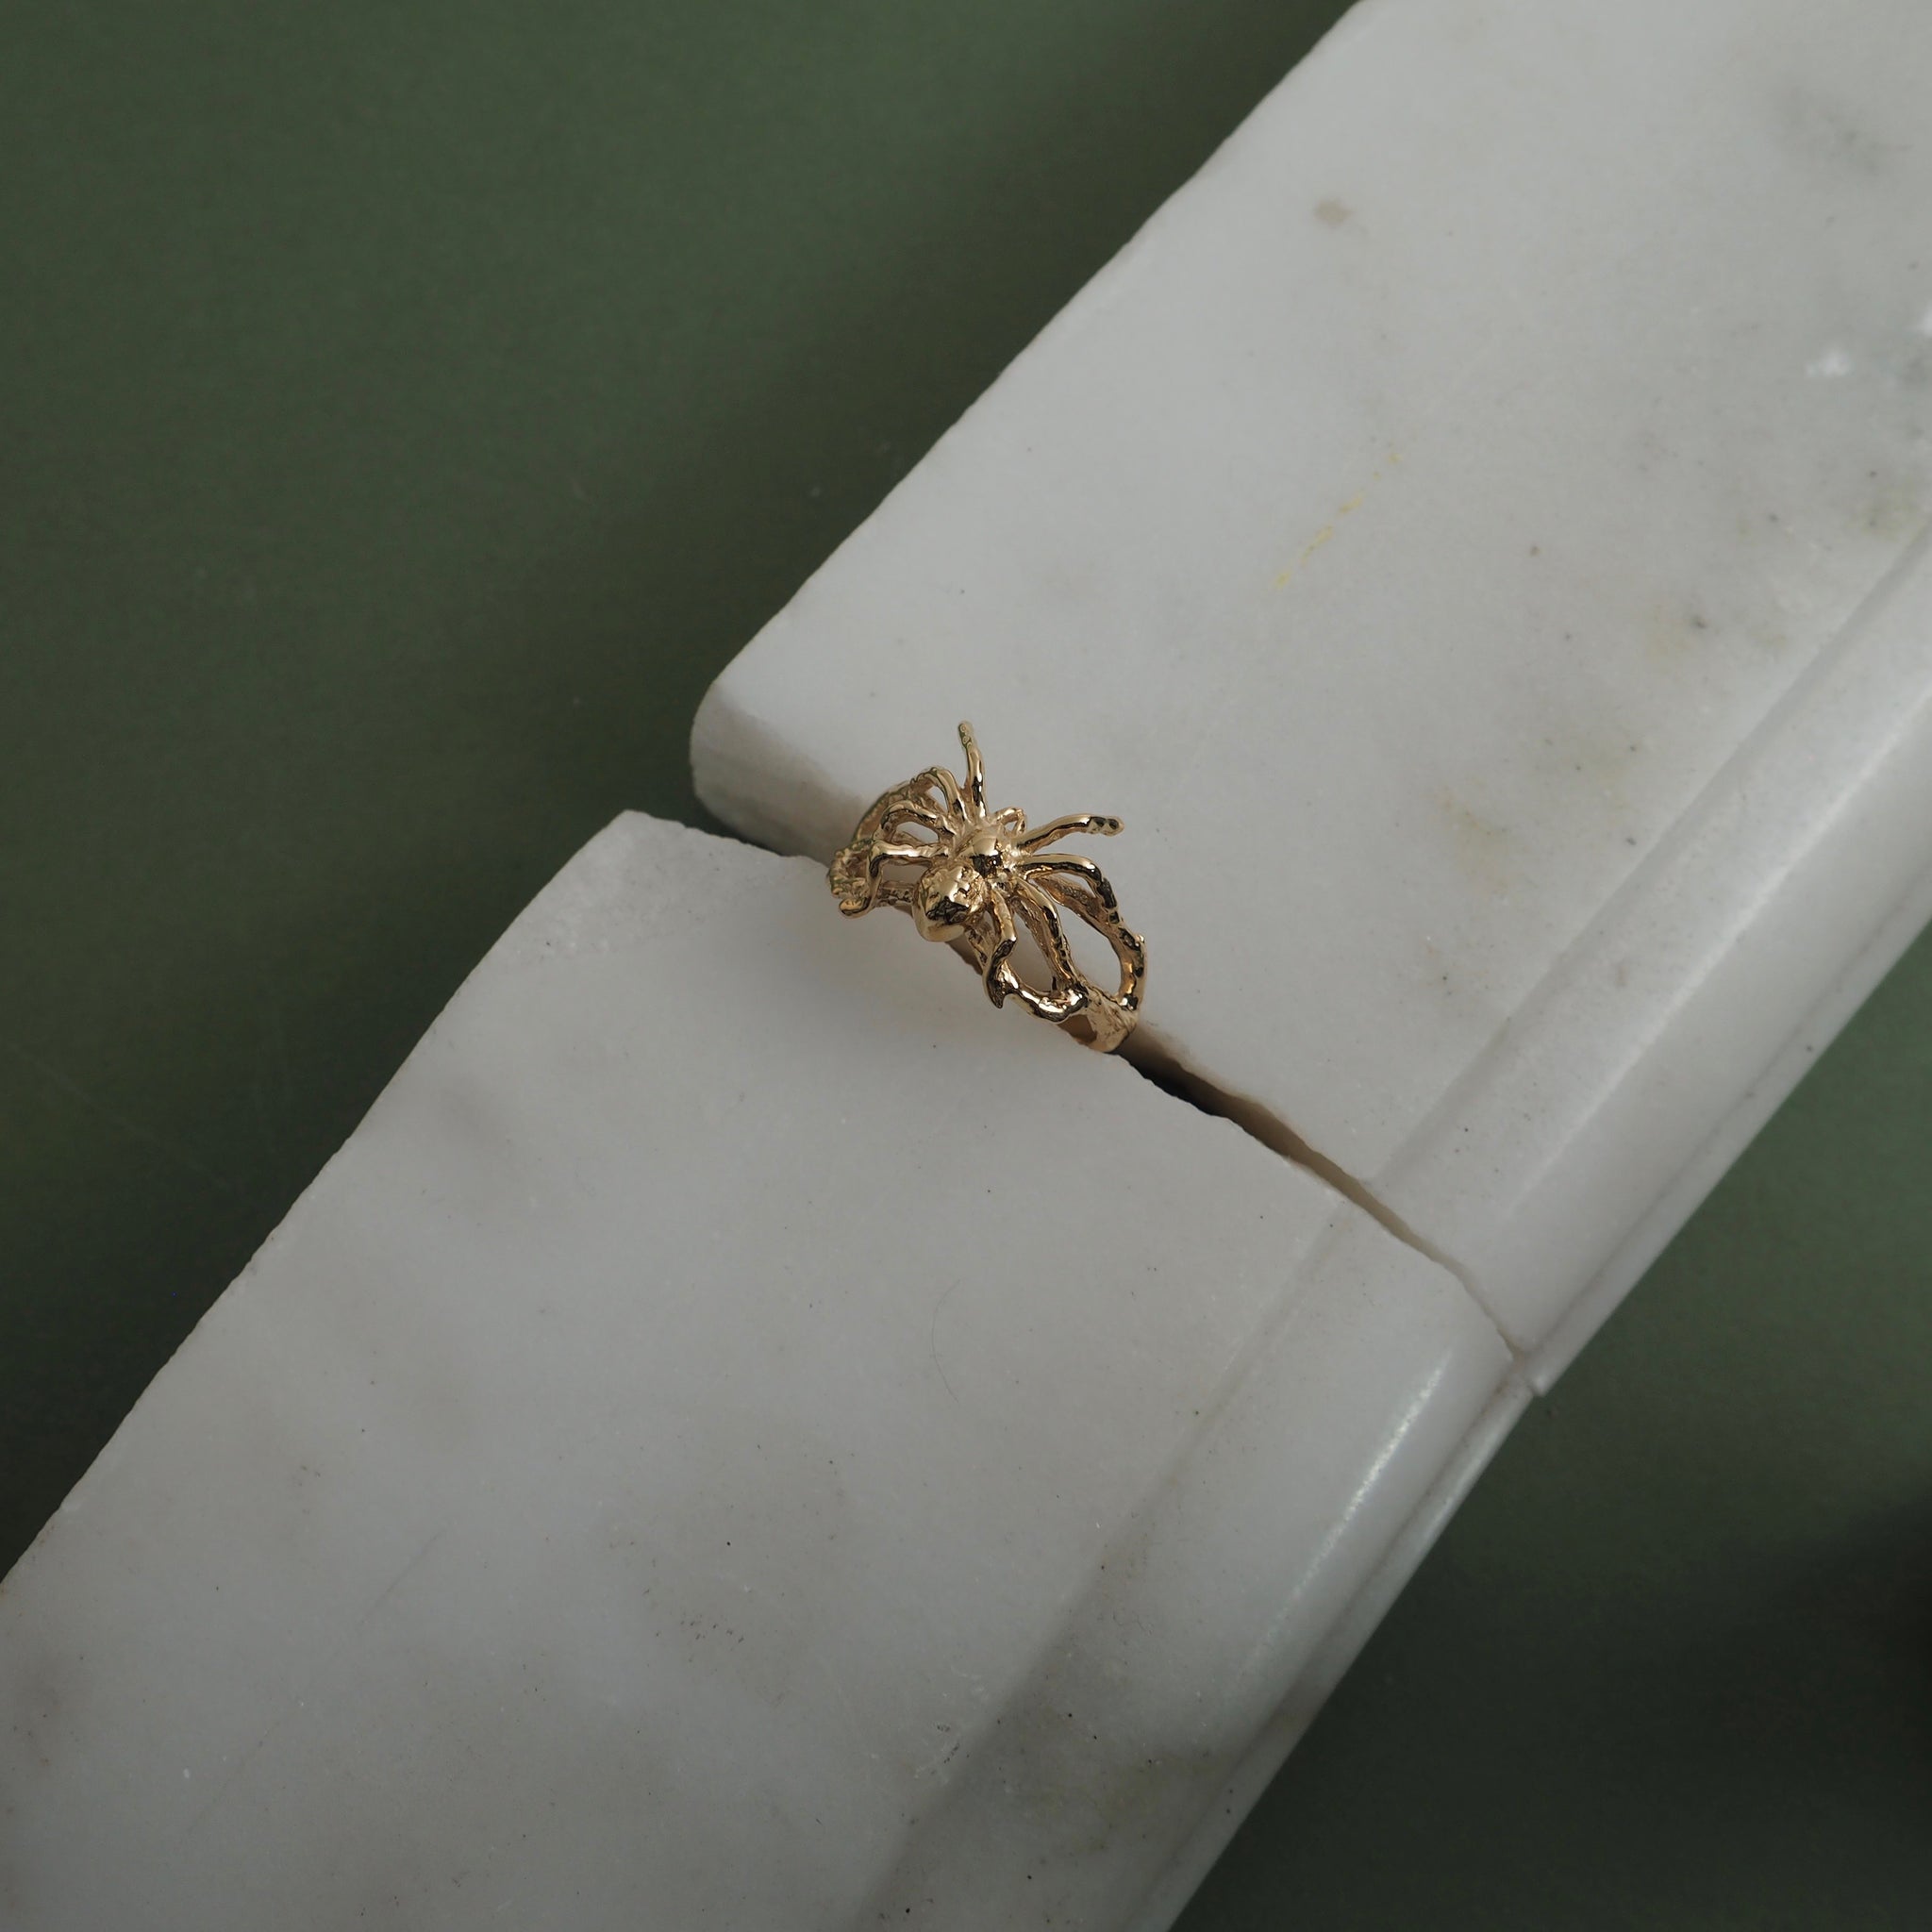 9ct Gold Little Spider Ring by Yasmin Everley